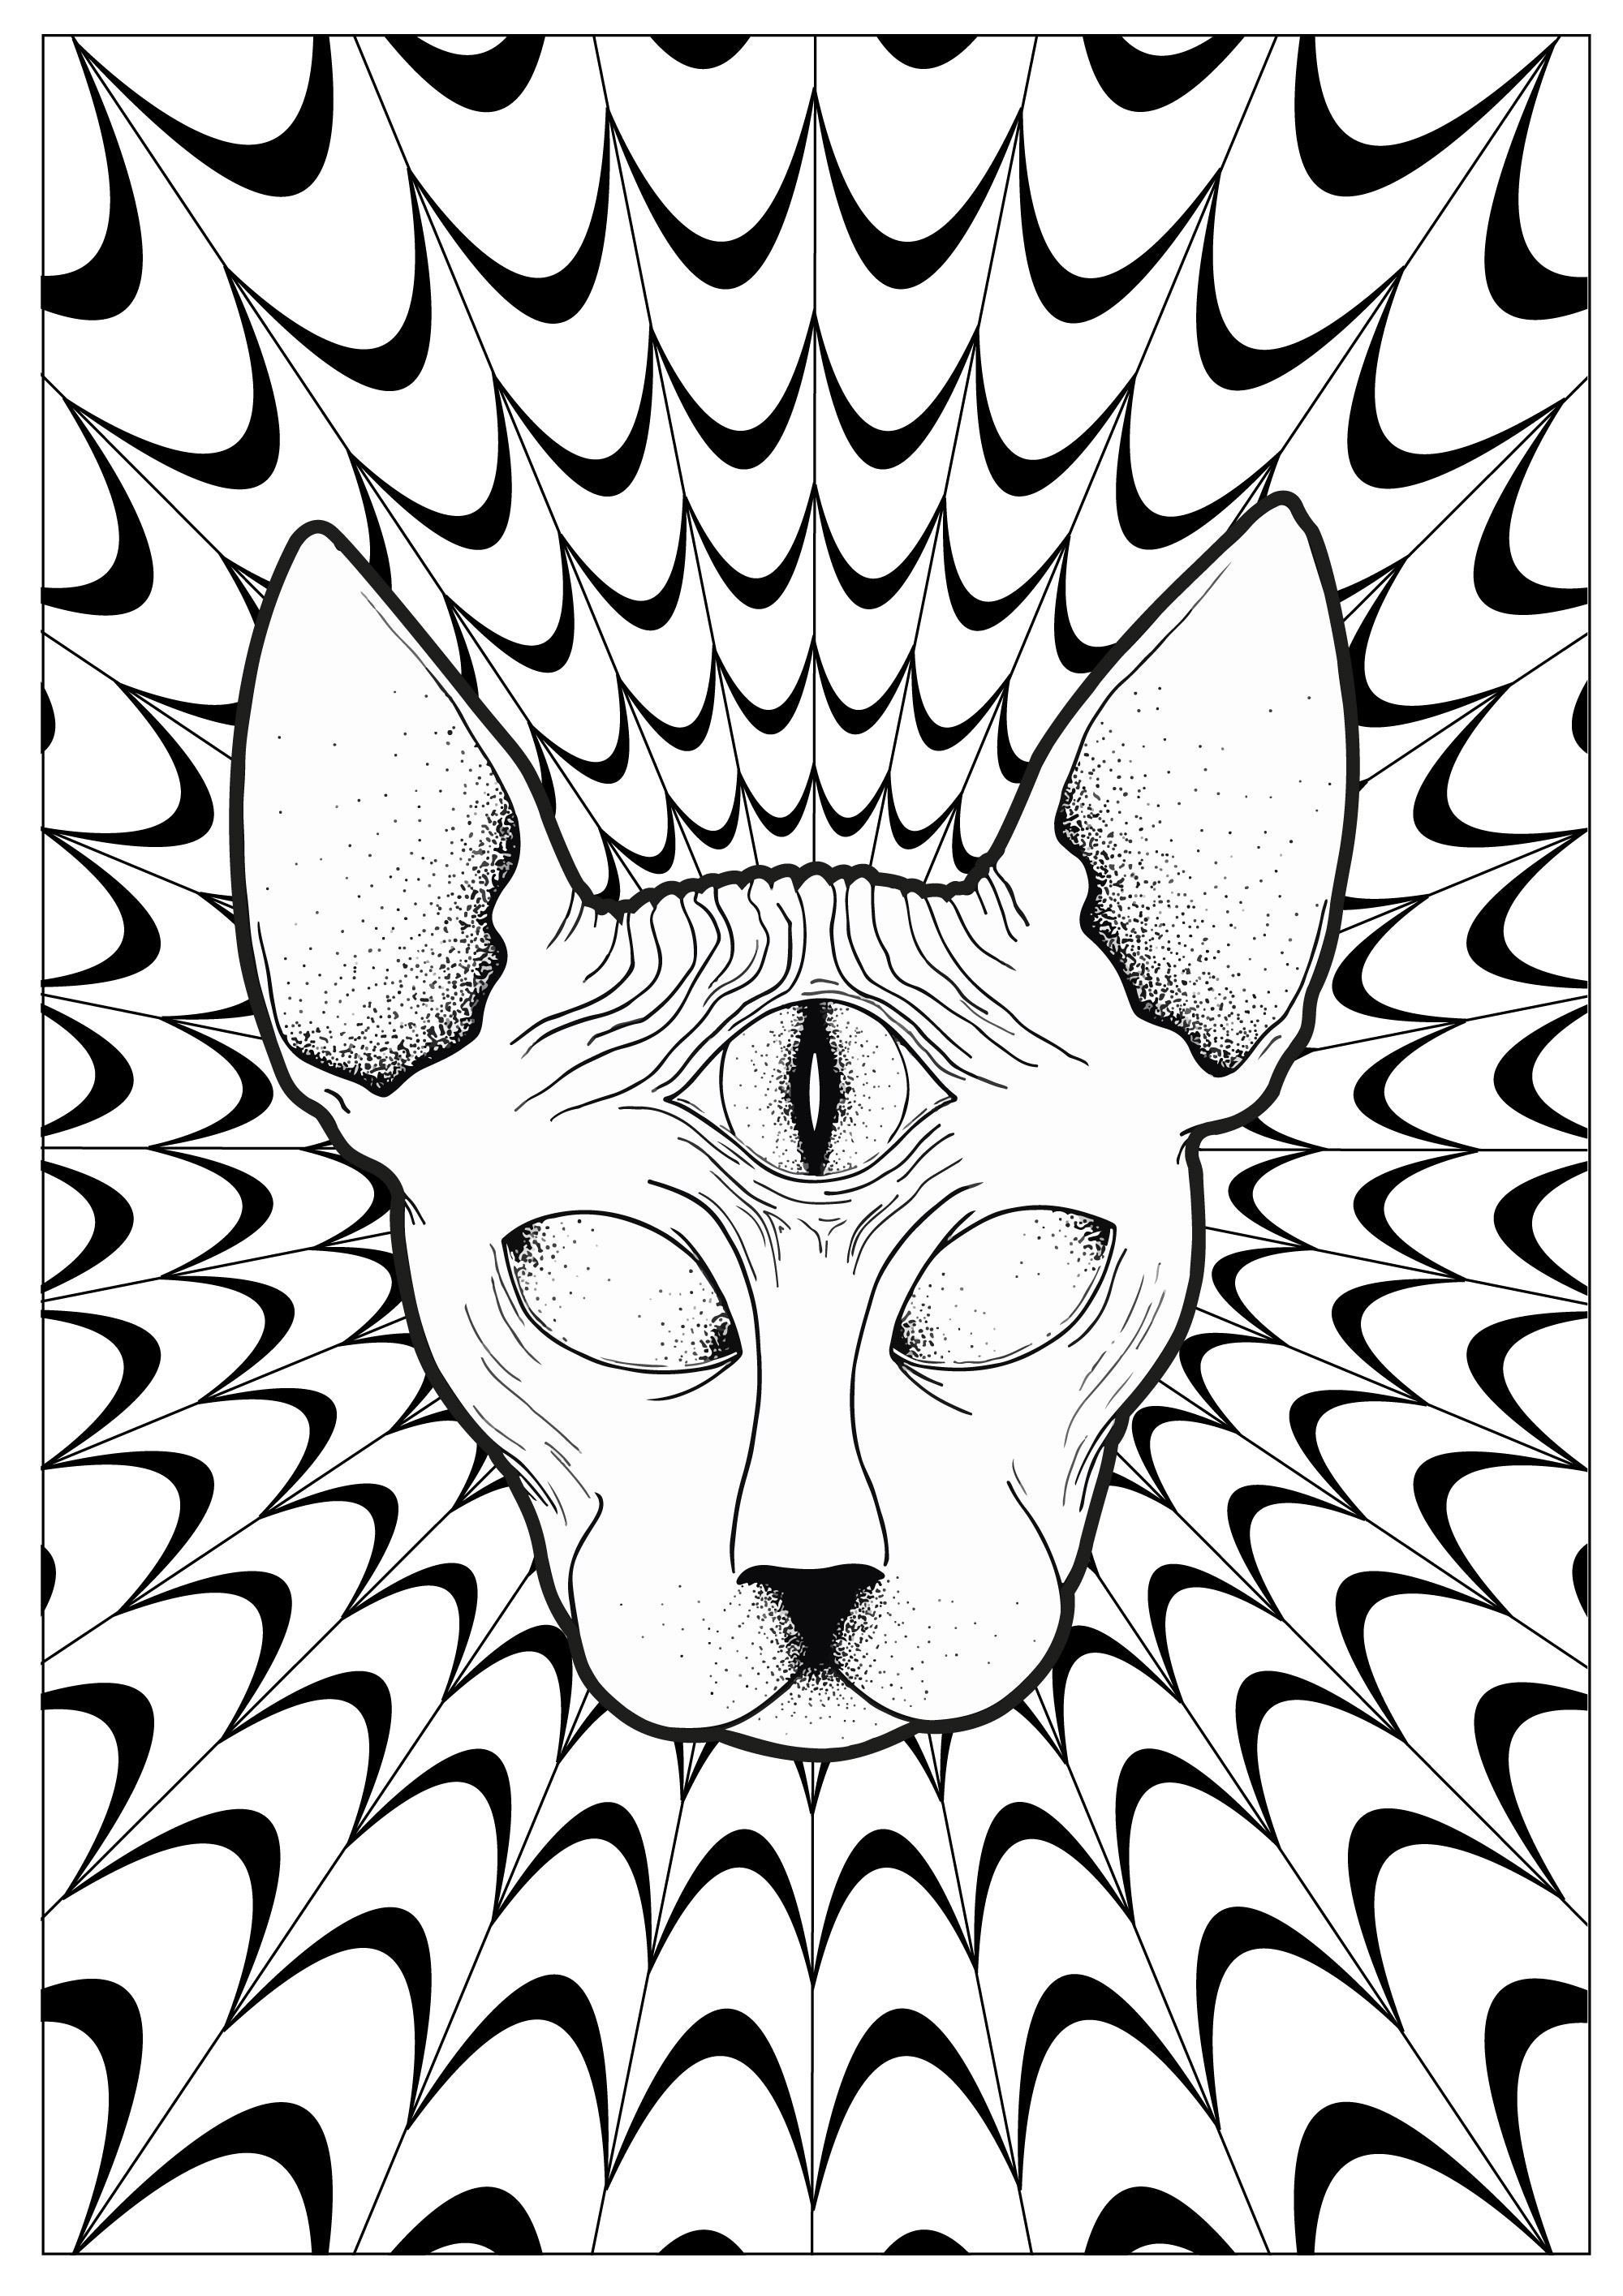 35 Trippy (Psychedelic) Coloring Pages For Adults